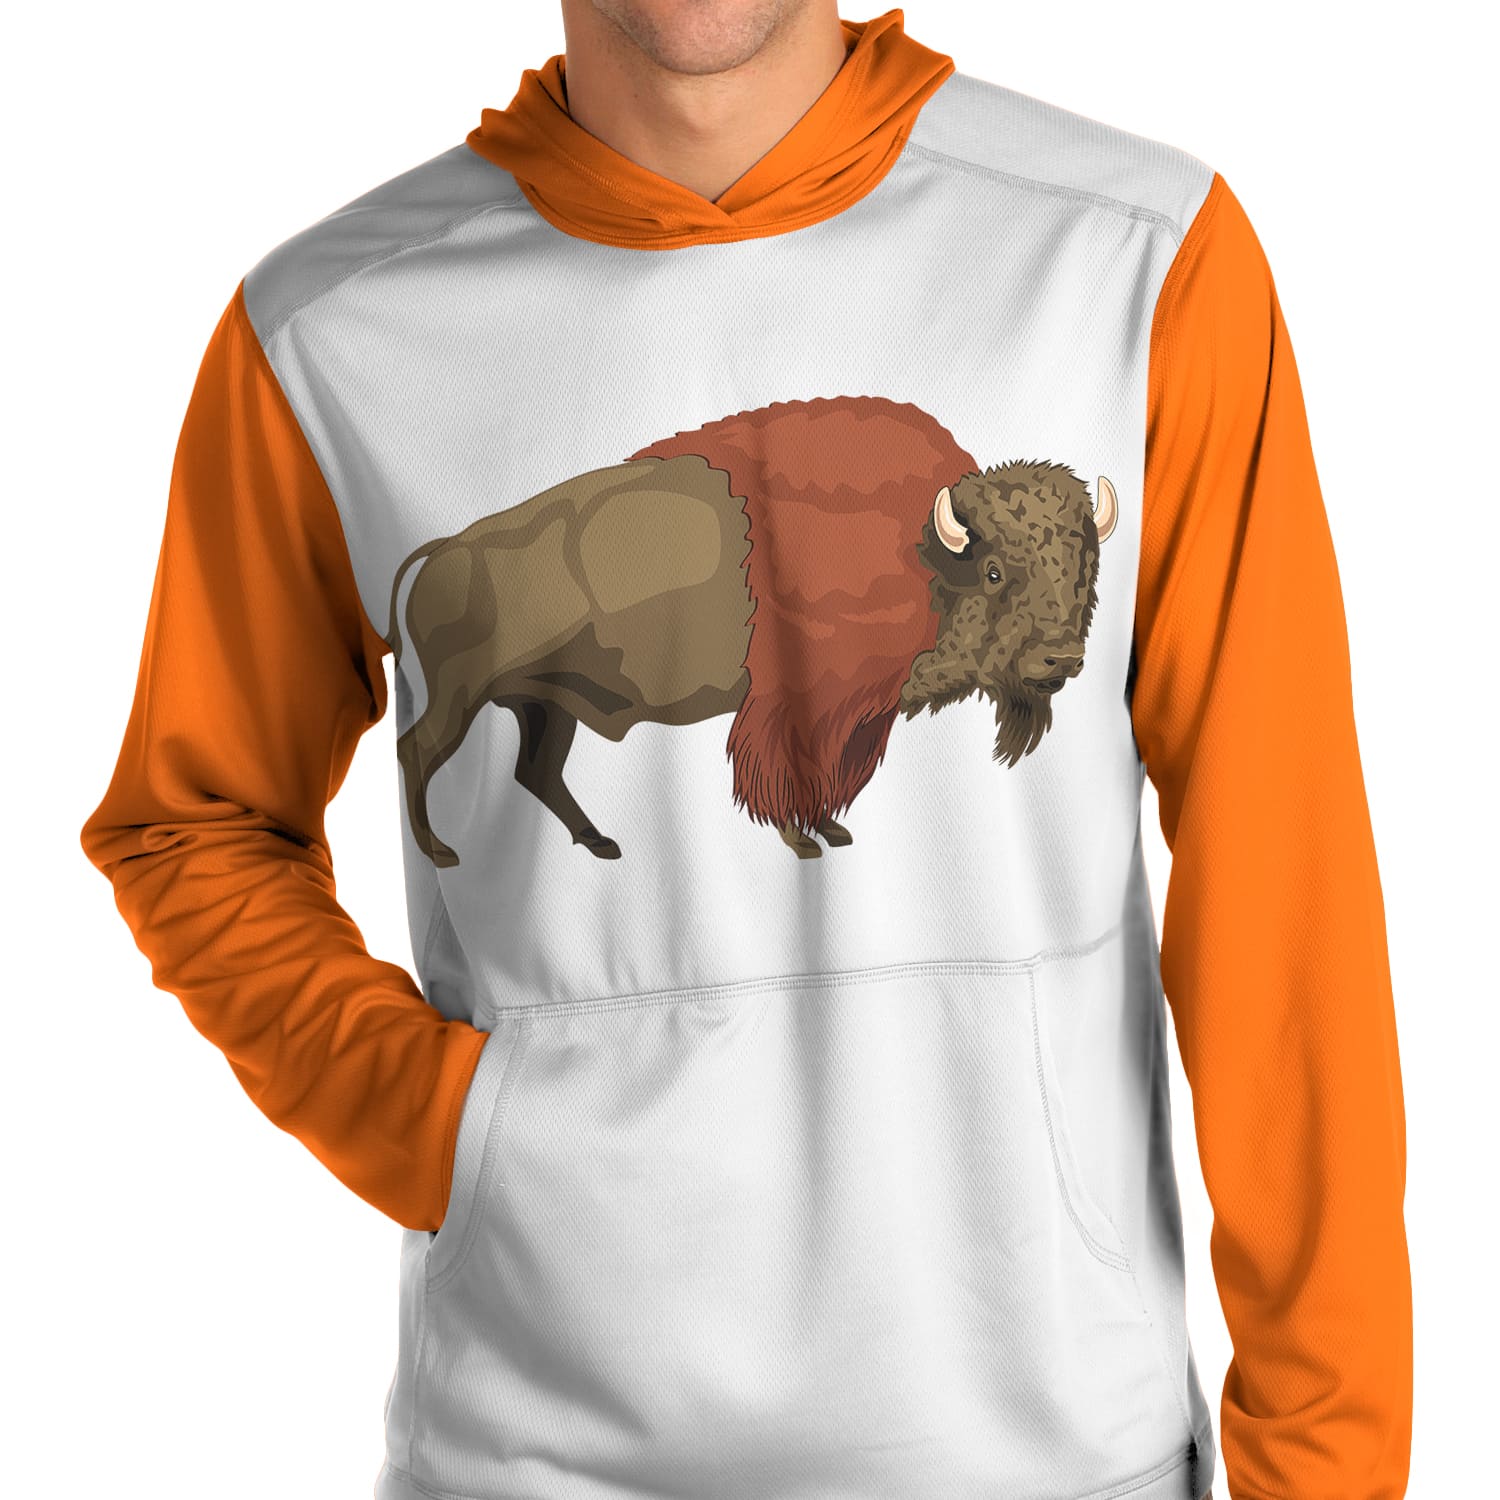 Man wearing an orange and white hoodie with a buffalo on it.